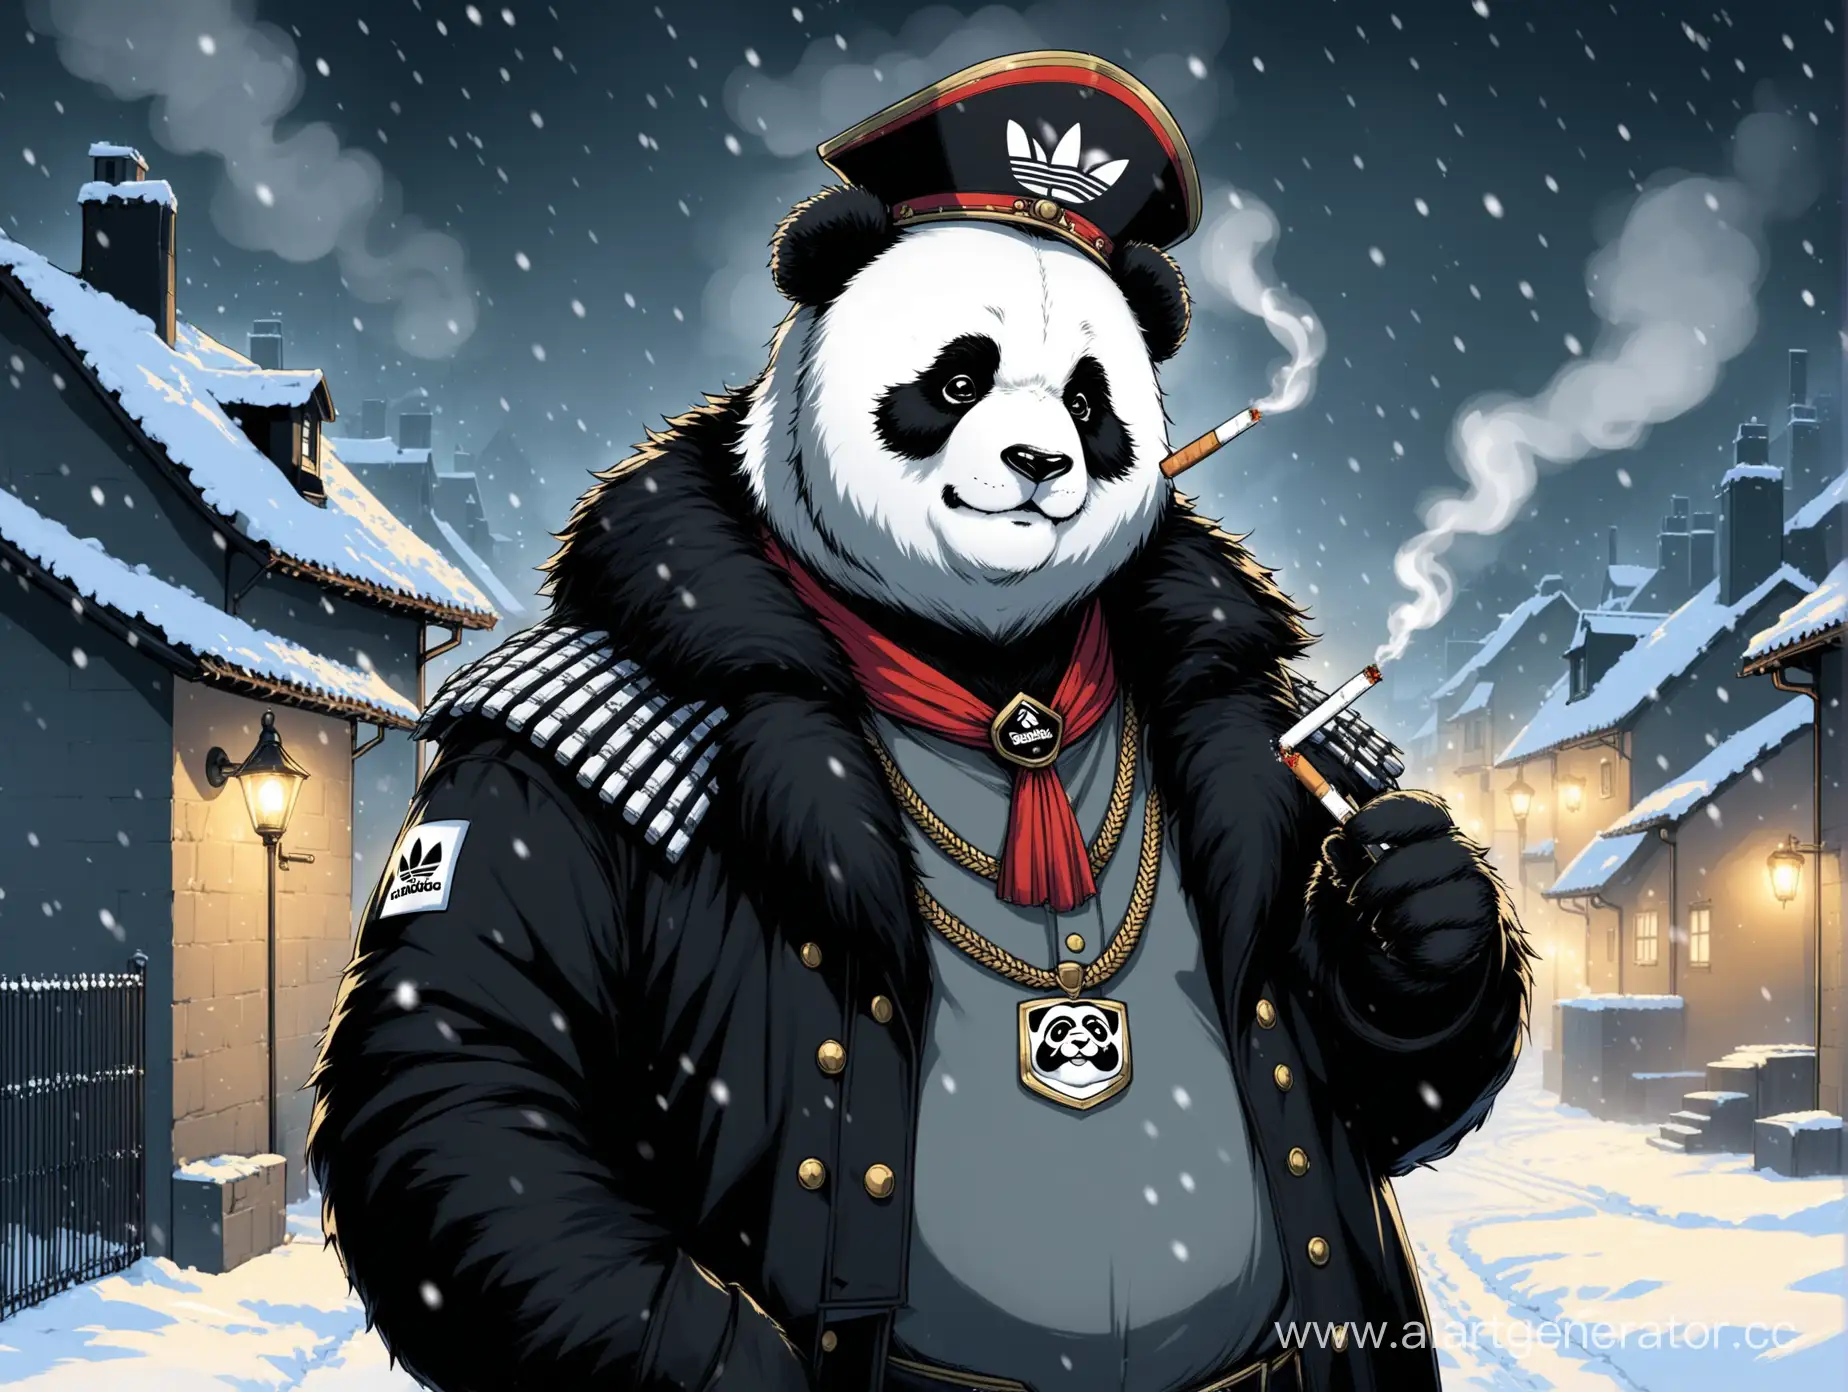 Doomer-Panda-Furry-with-Hussar-Mustaches-Smoking-sadly-Amidst-90s-Gray-Snowy-Houses